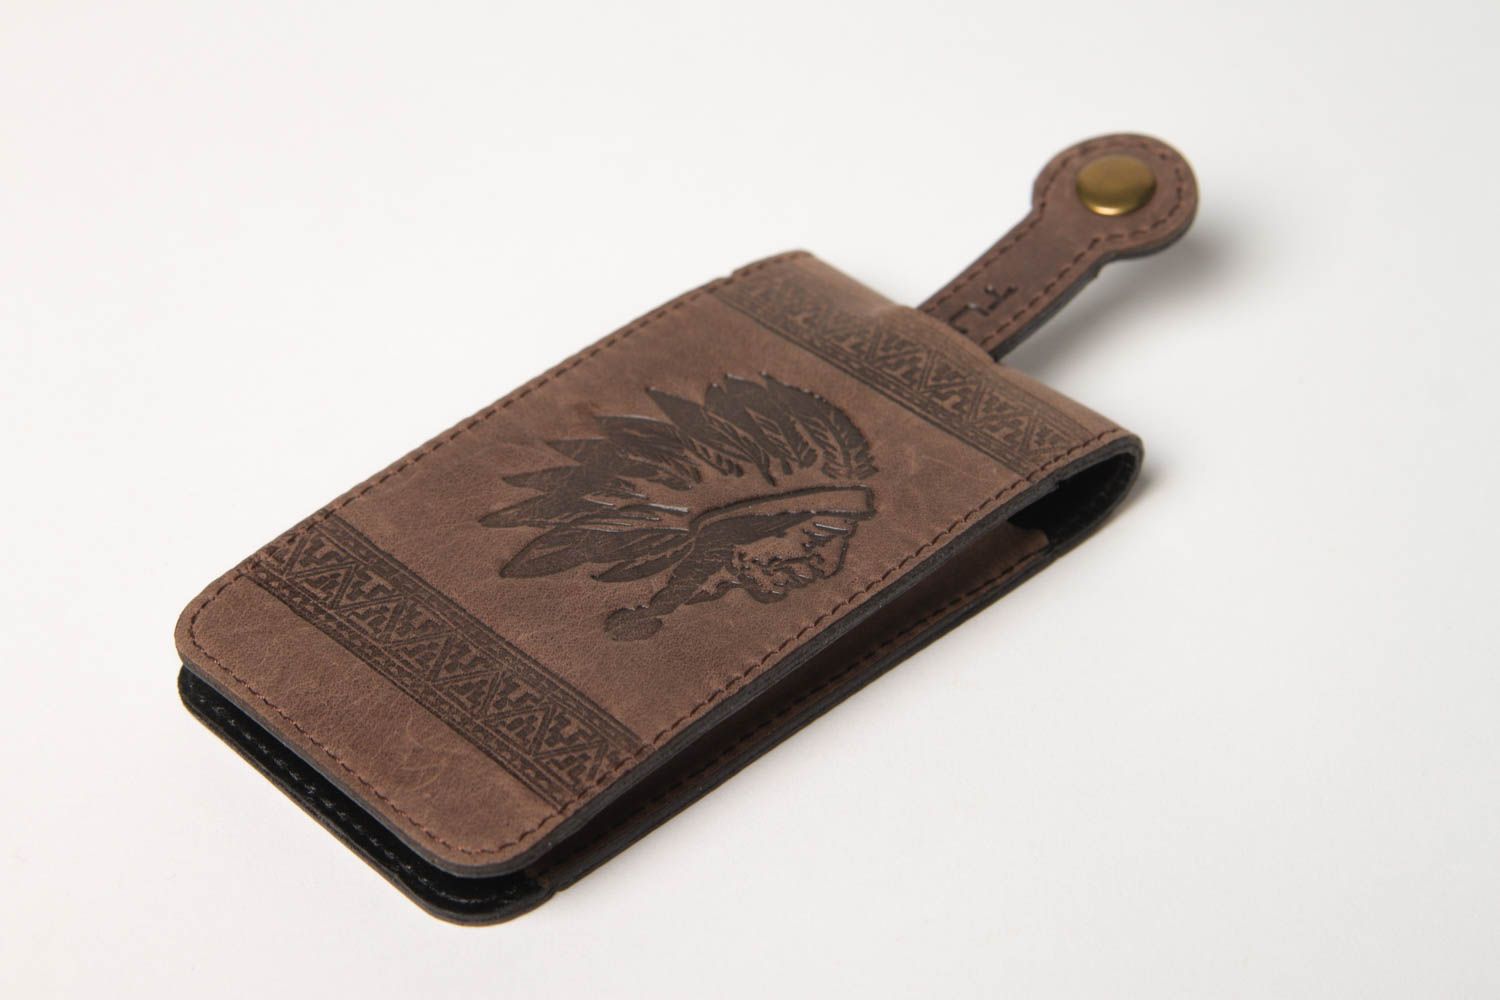 Unusual handmade leather key case handmade accessories best gifts for him photo 2